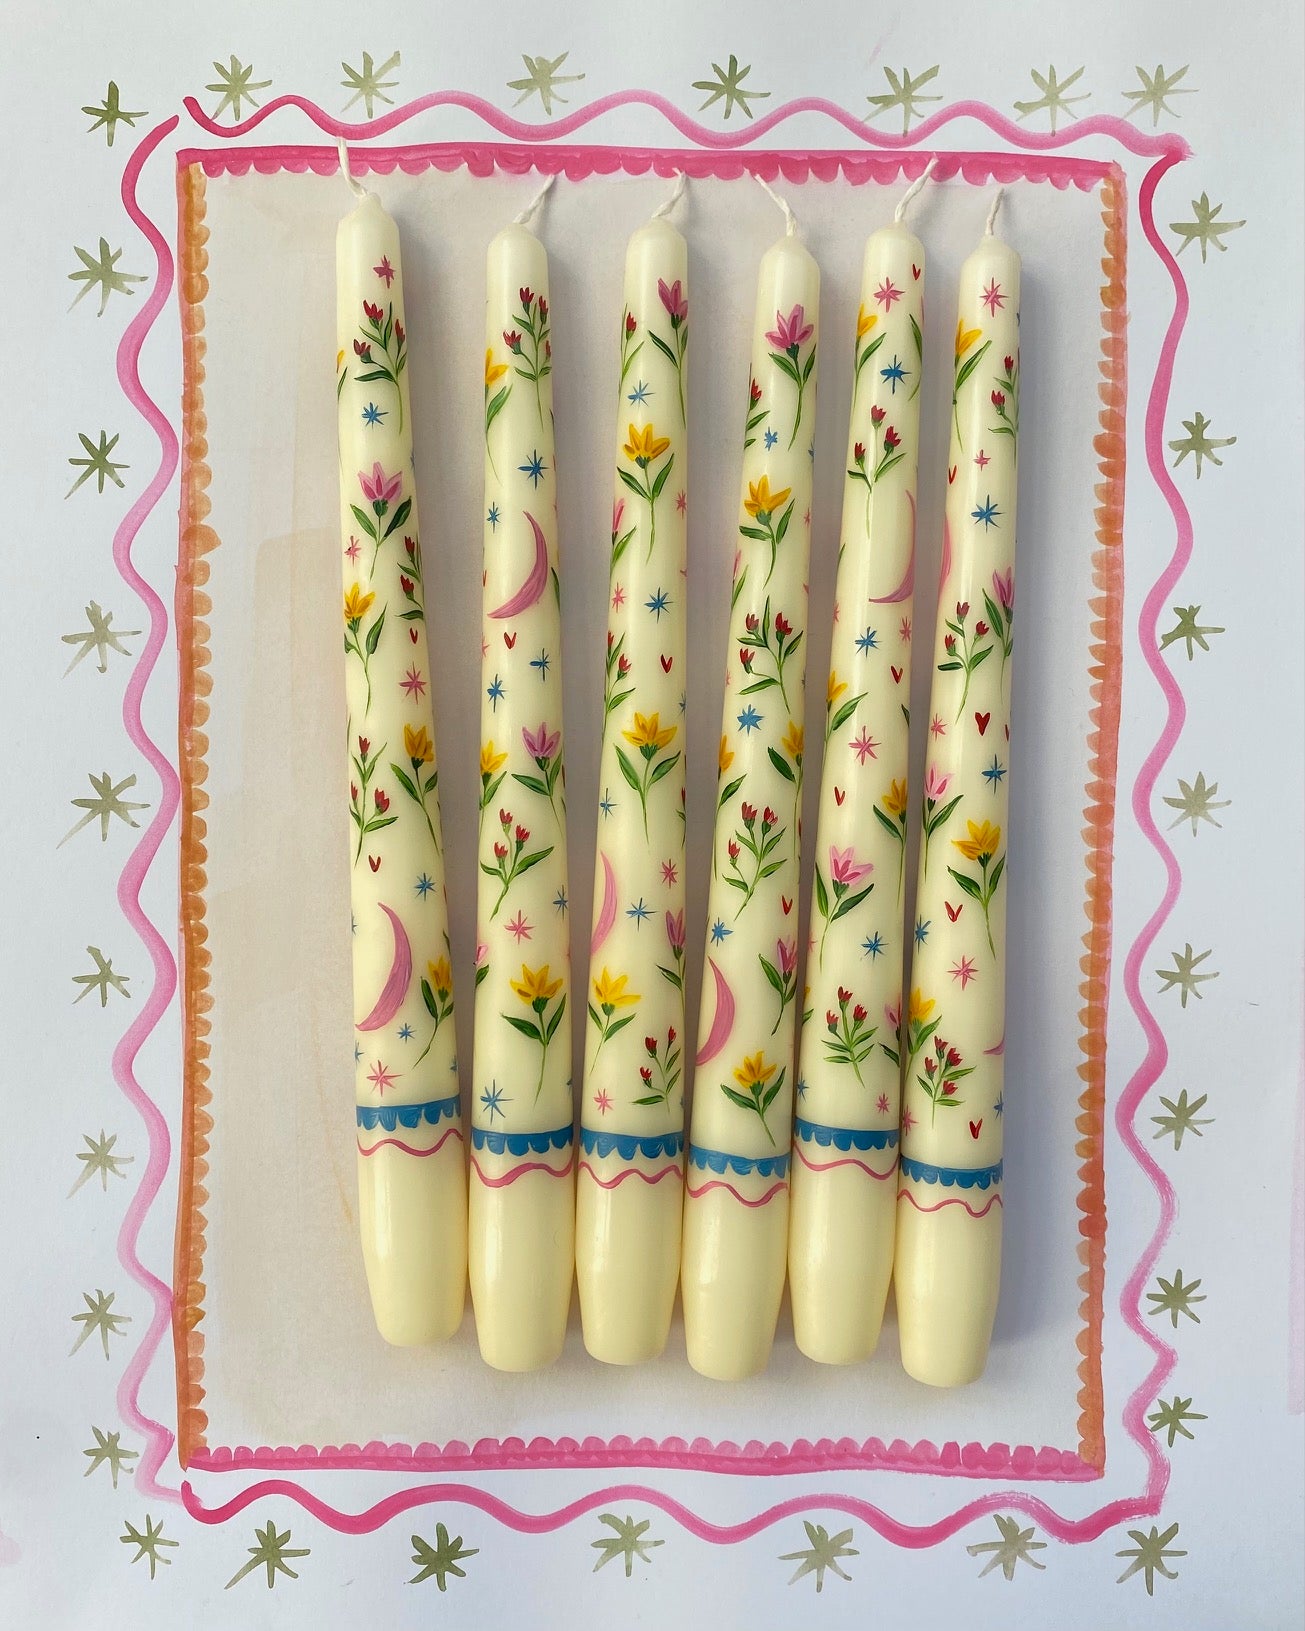 ivory dinner candles with celestial and floral hand painted details.